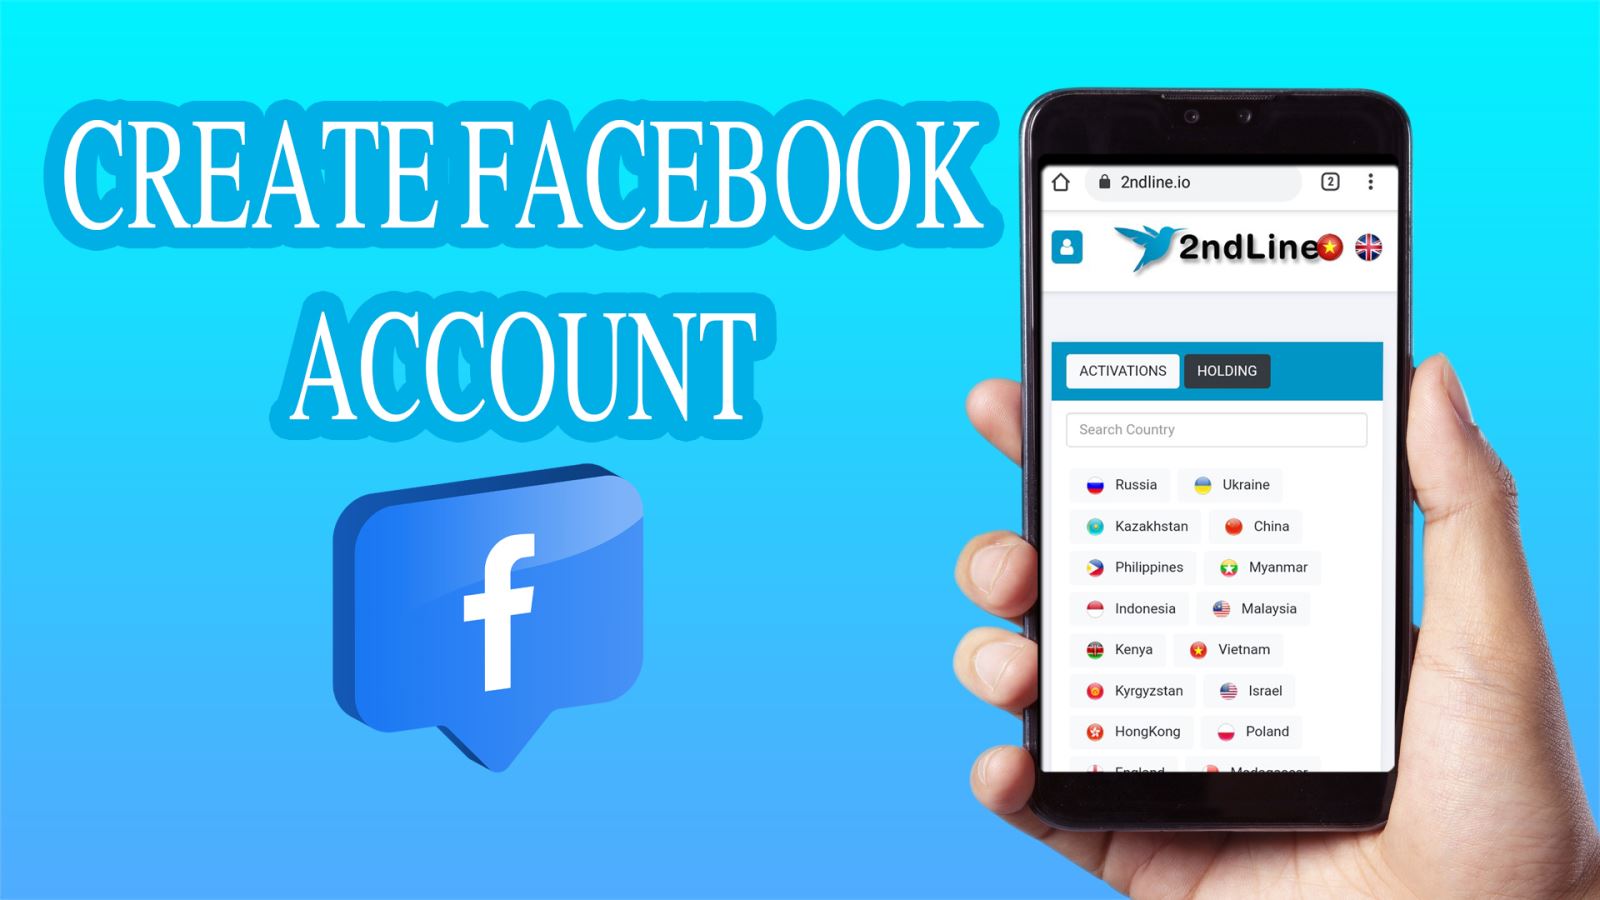 Instructions on how to create a facebook account at 2ndLine.io